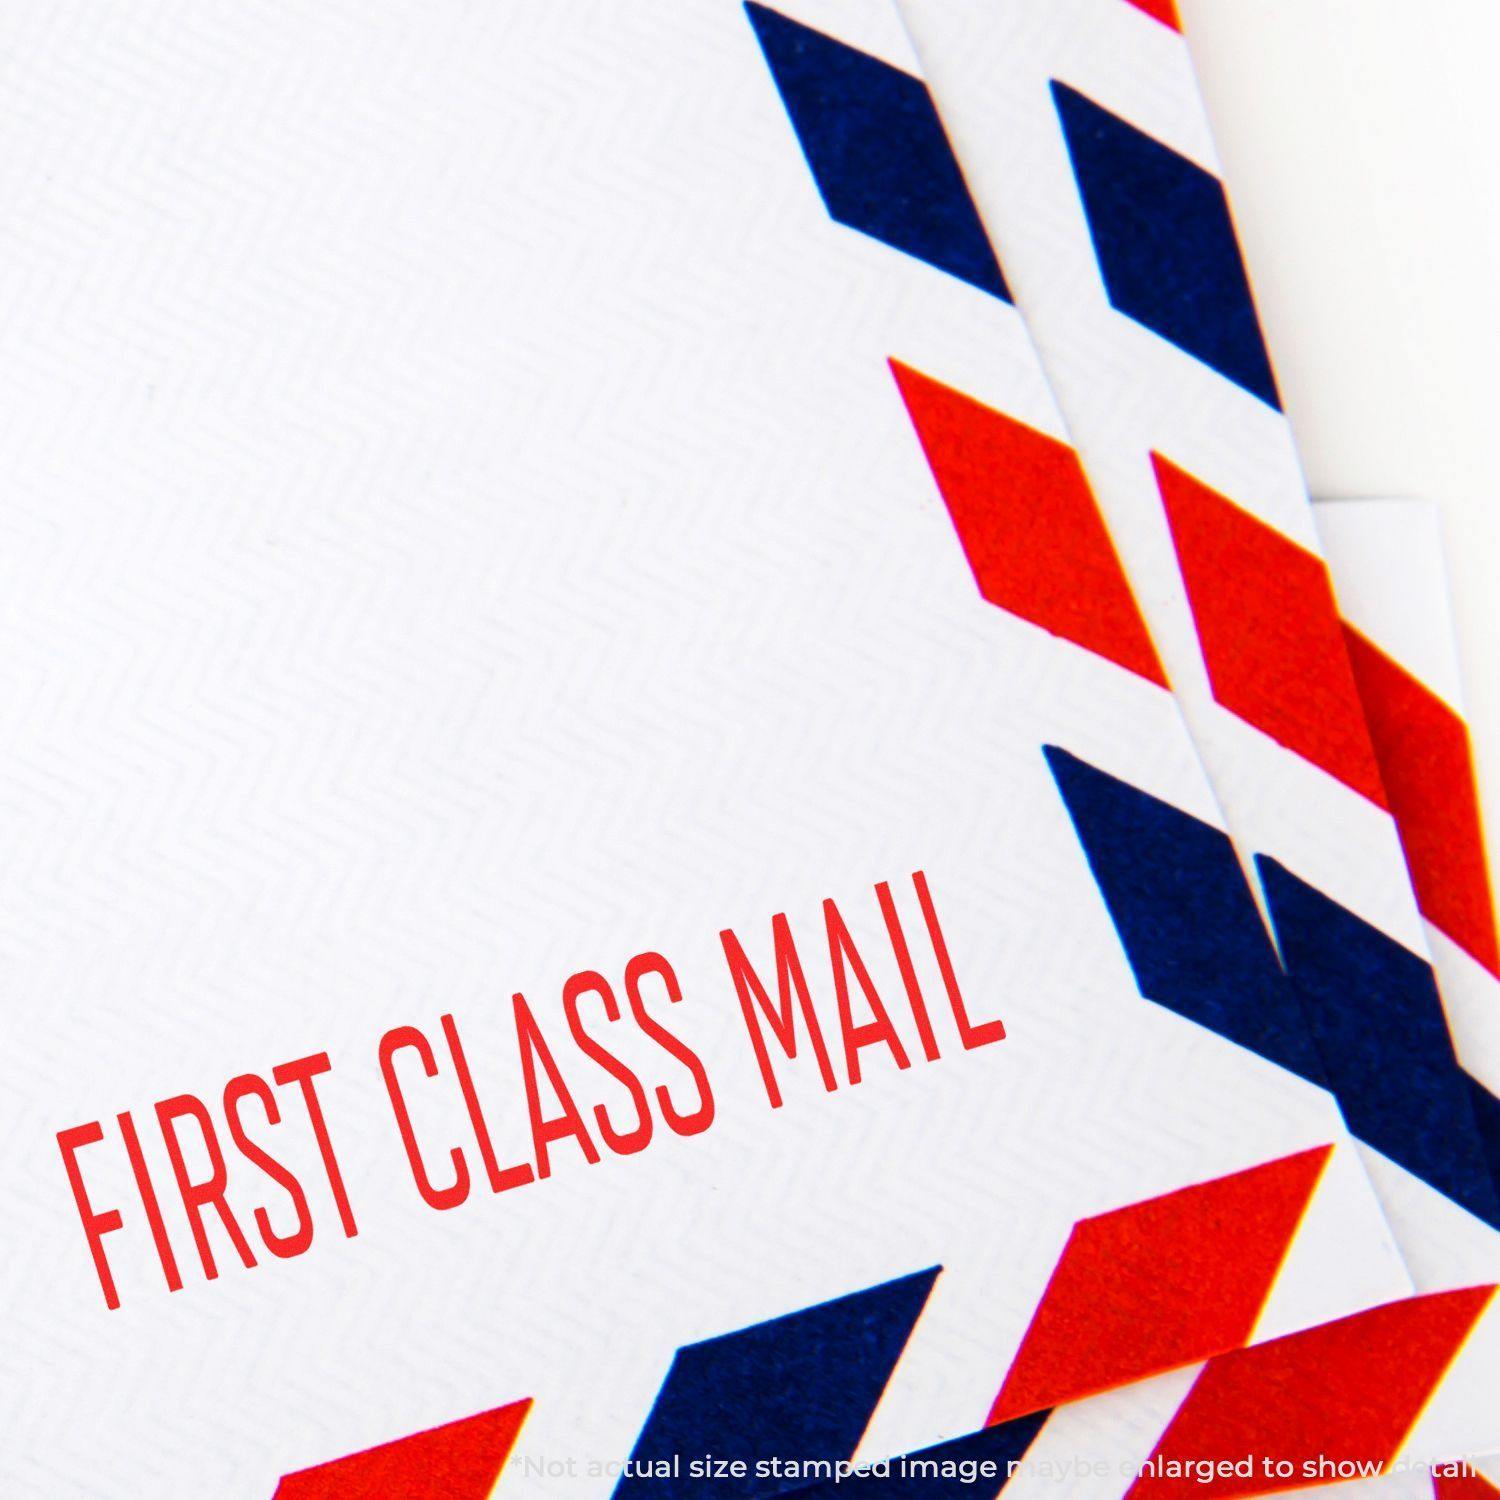 A stock office rubber stamp with a stamped image showing how the text "FIRST CLASS MAIL" in a large narrow font is displayed after stamping.